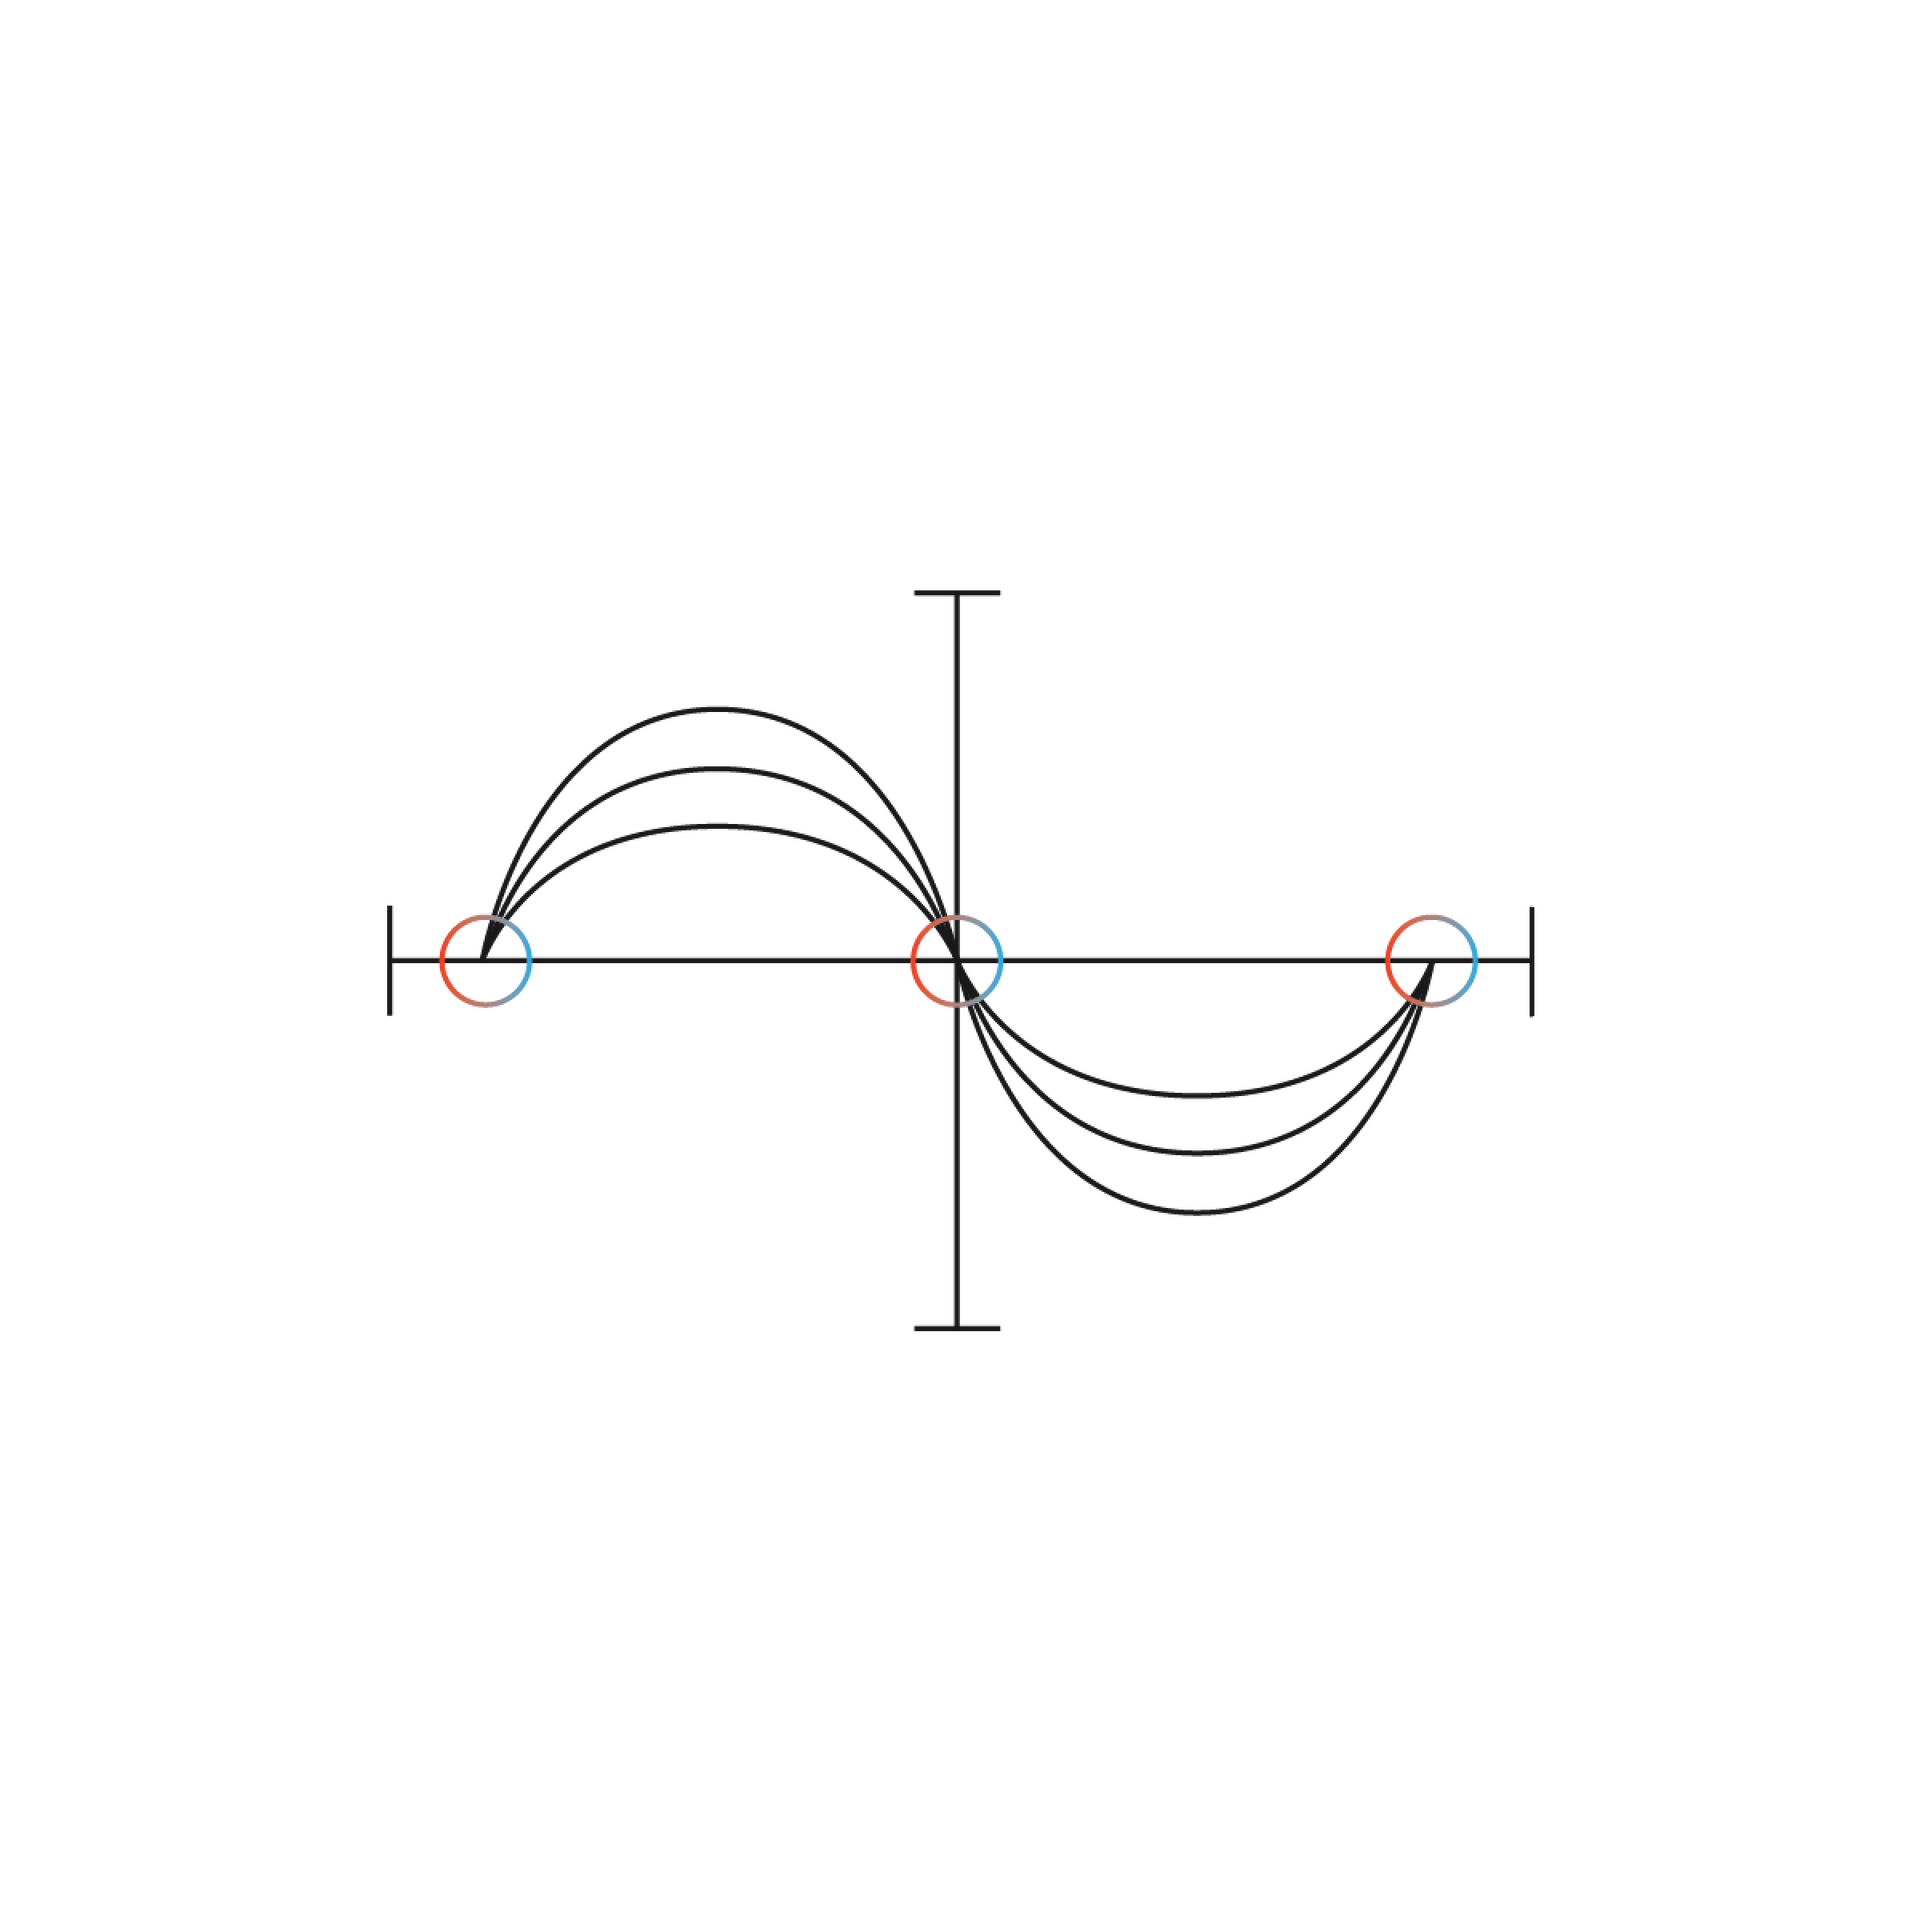 Illustration of black dashed circle inside of another black circle on white background three-point cable management system.